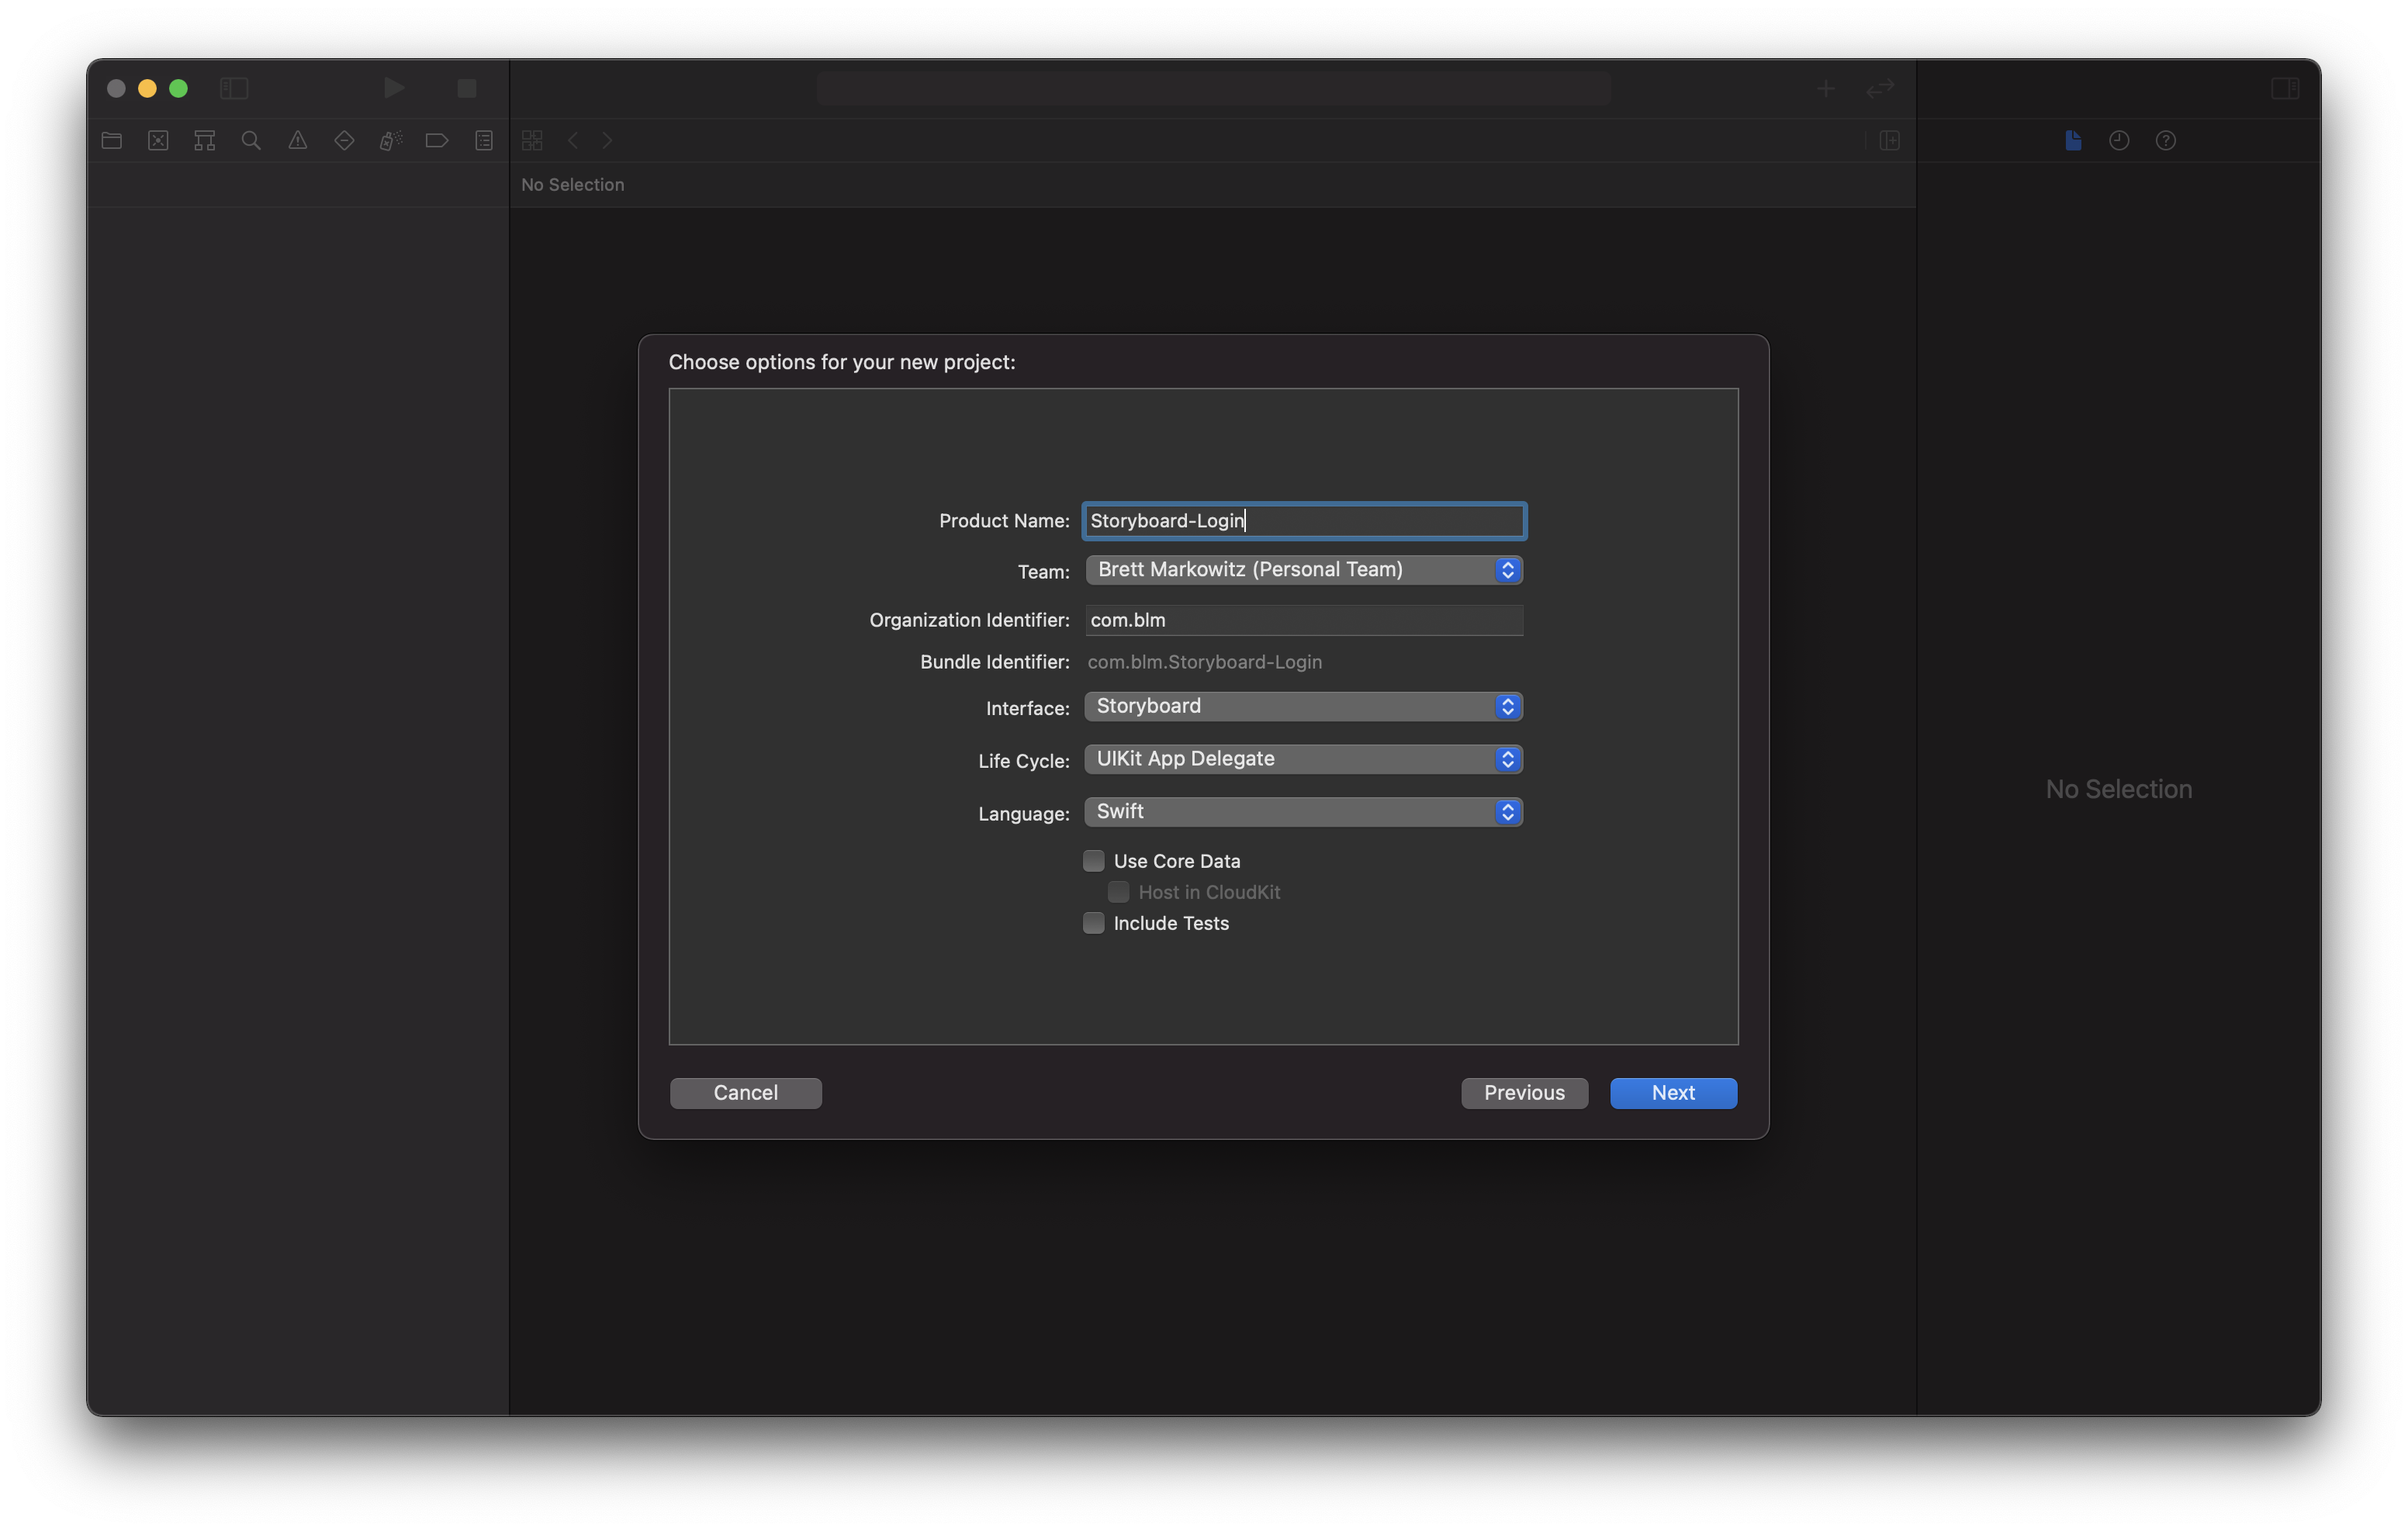 The Xcode project creation screen